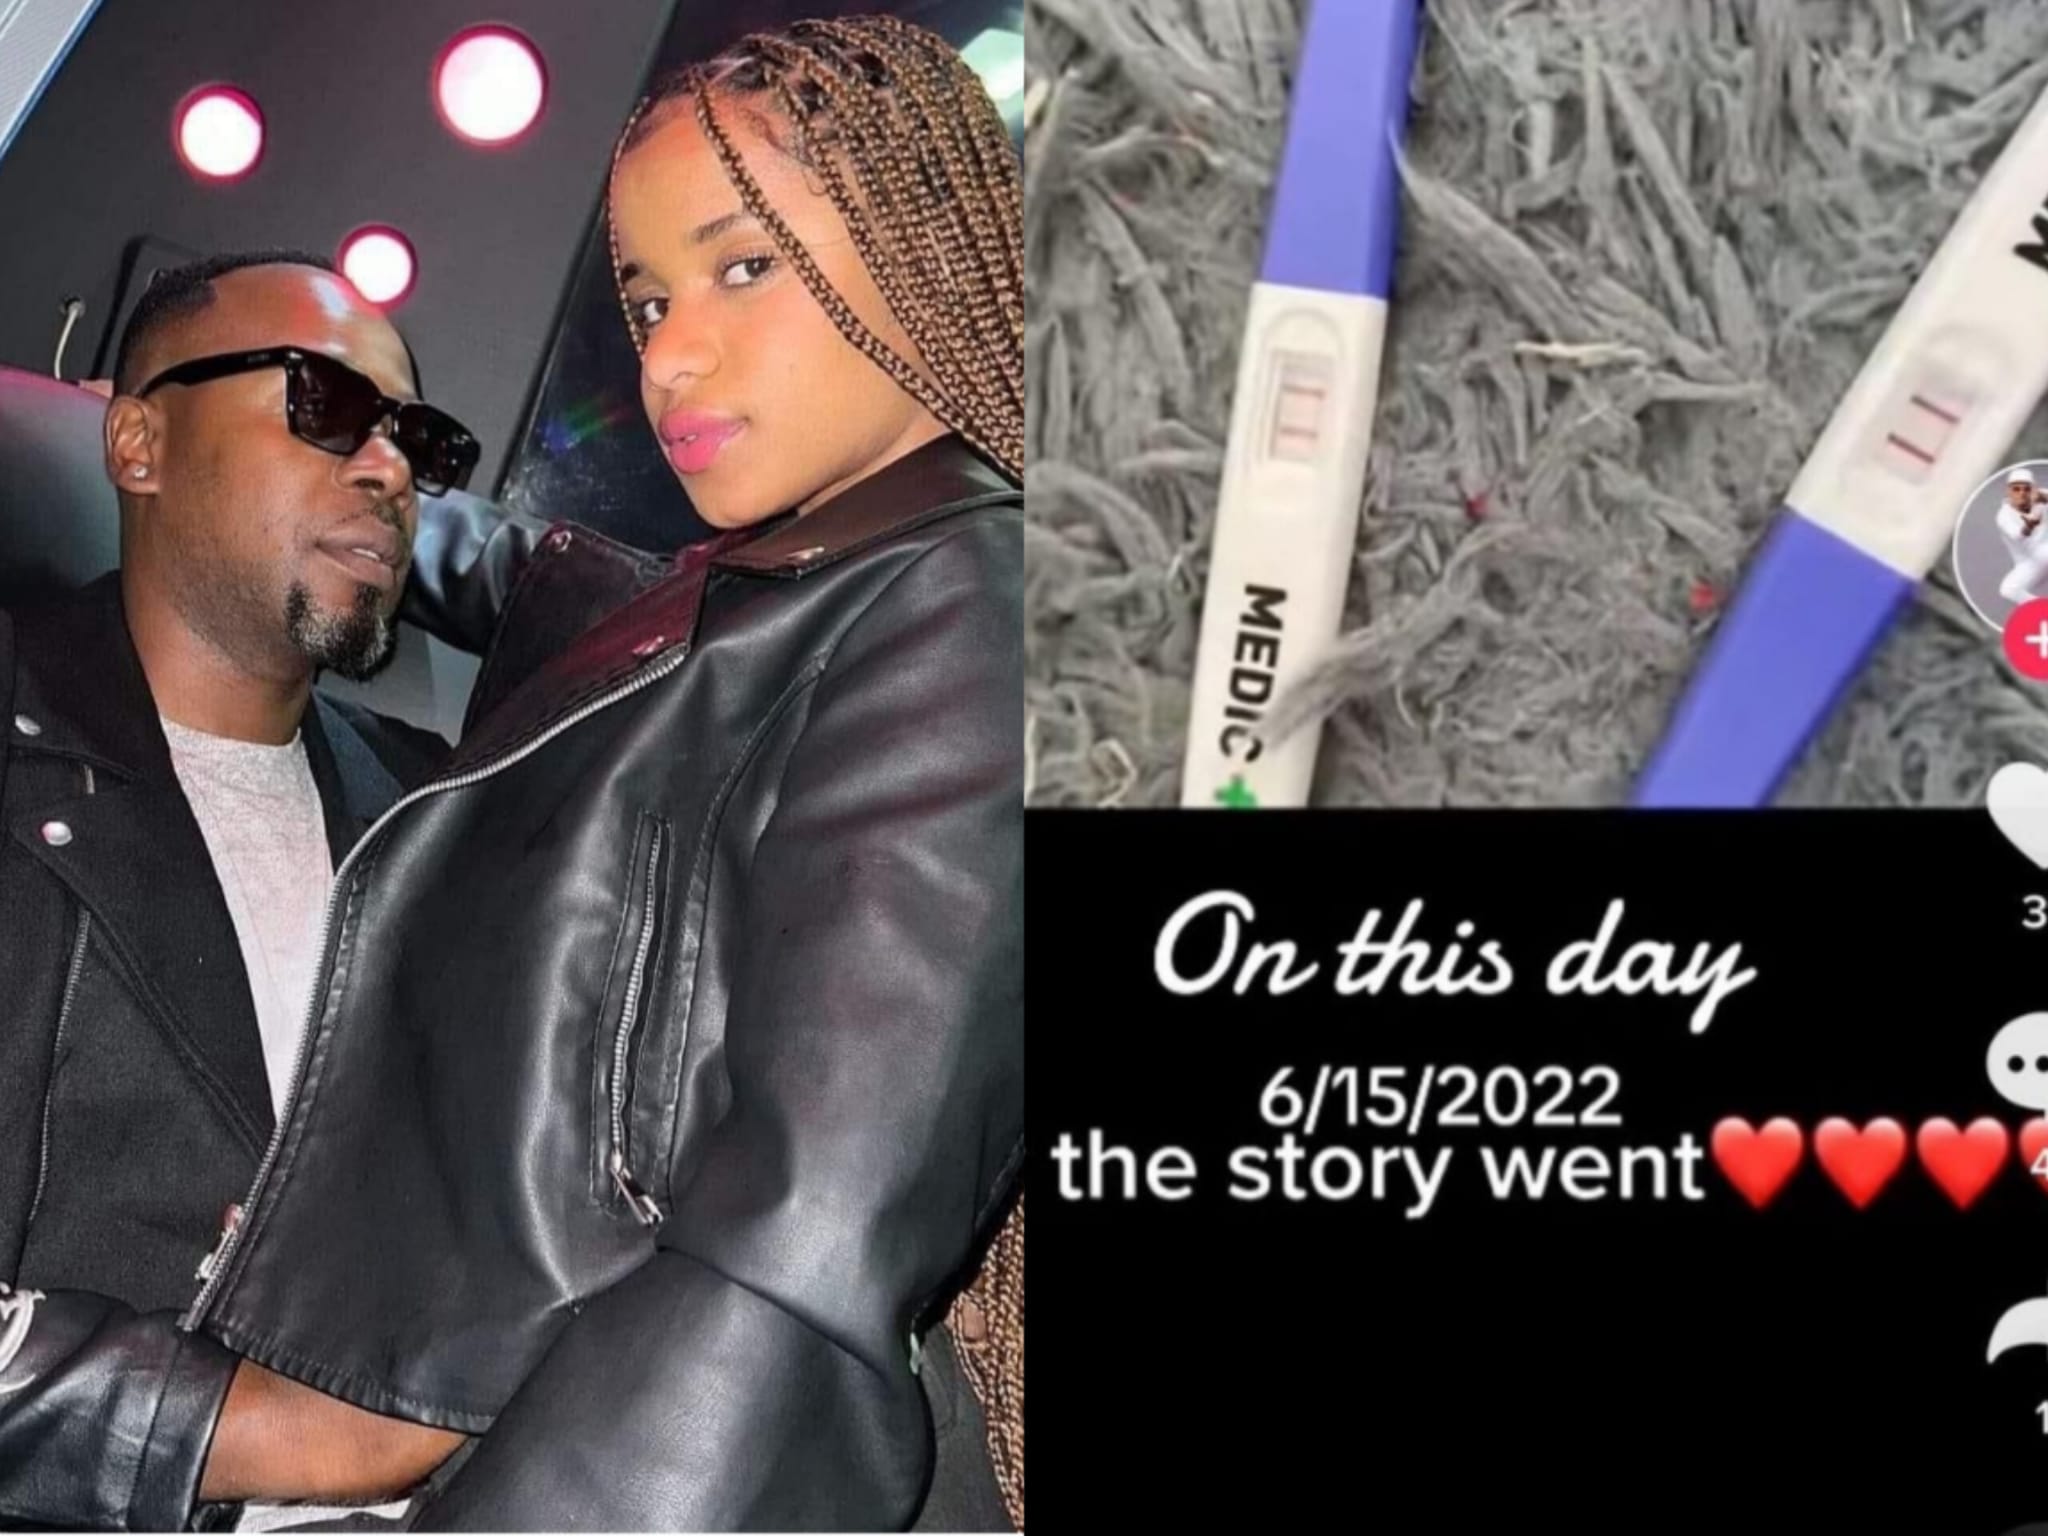 Mpfanha WeChidiki 'Stunner' Expecting a New Baby 